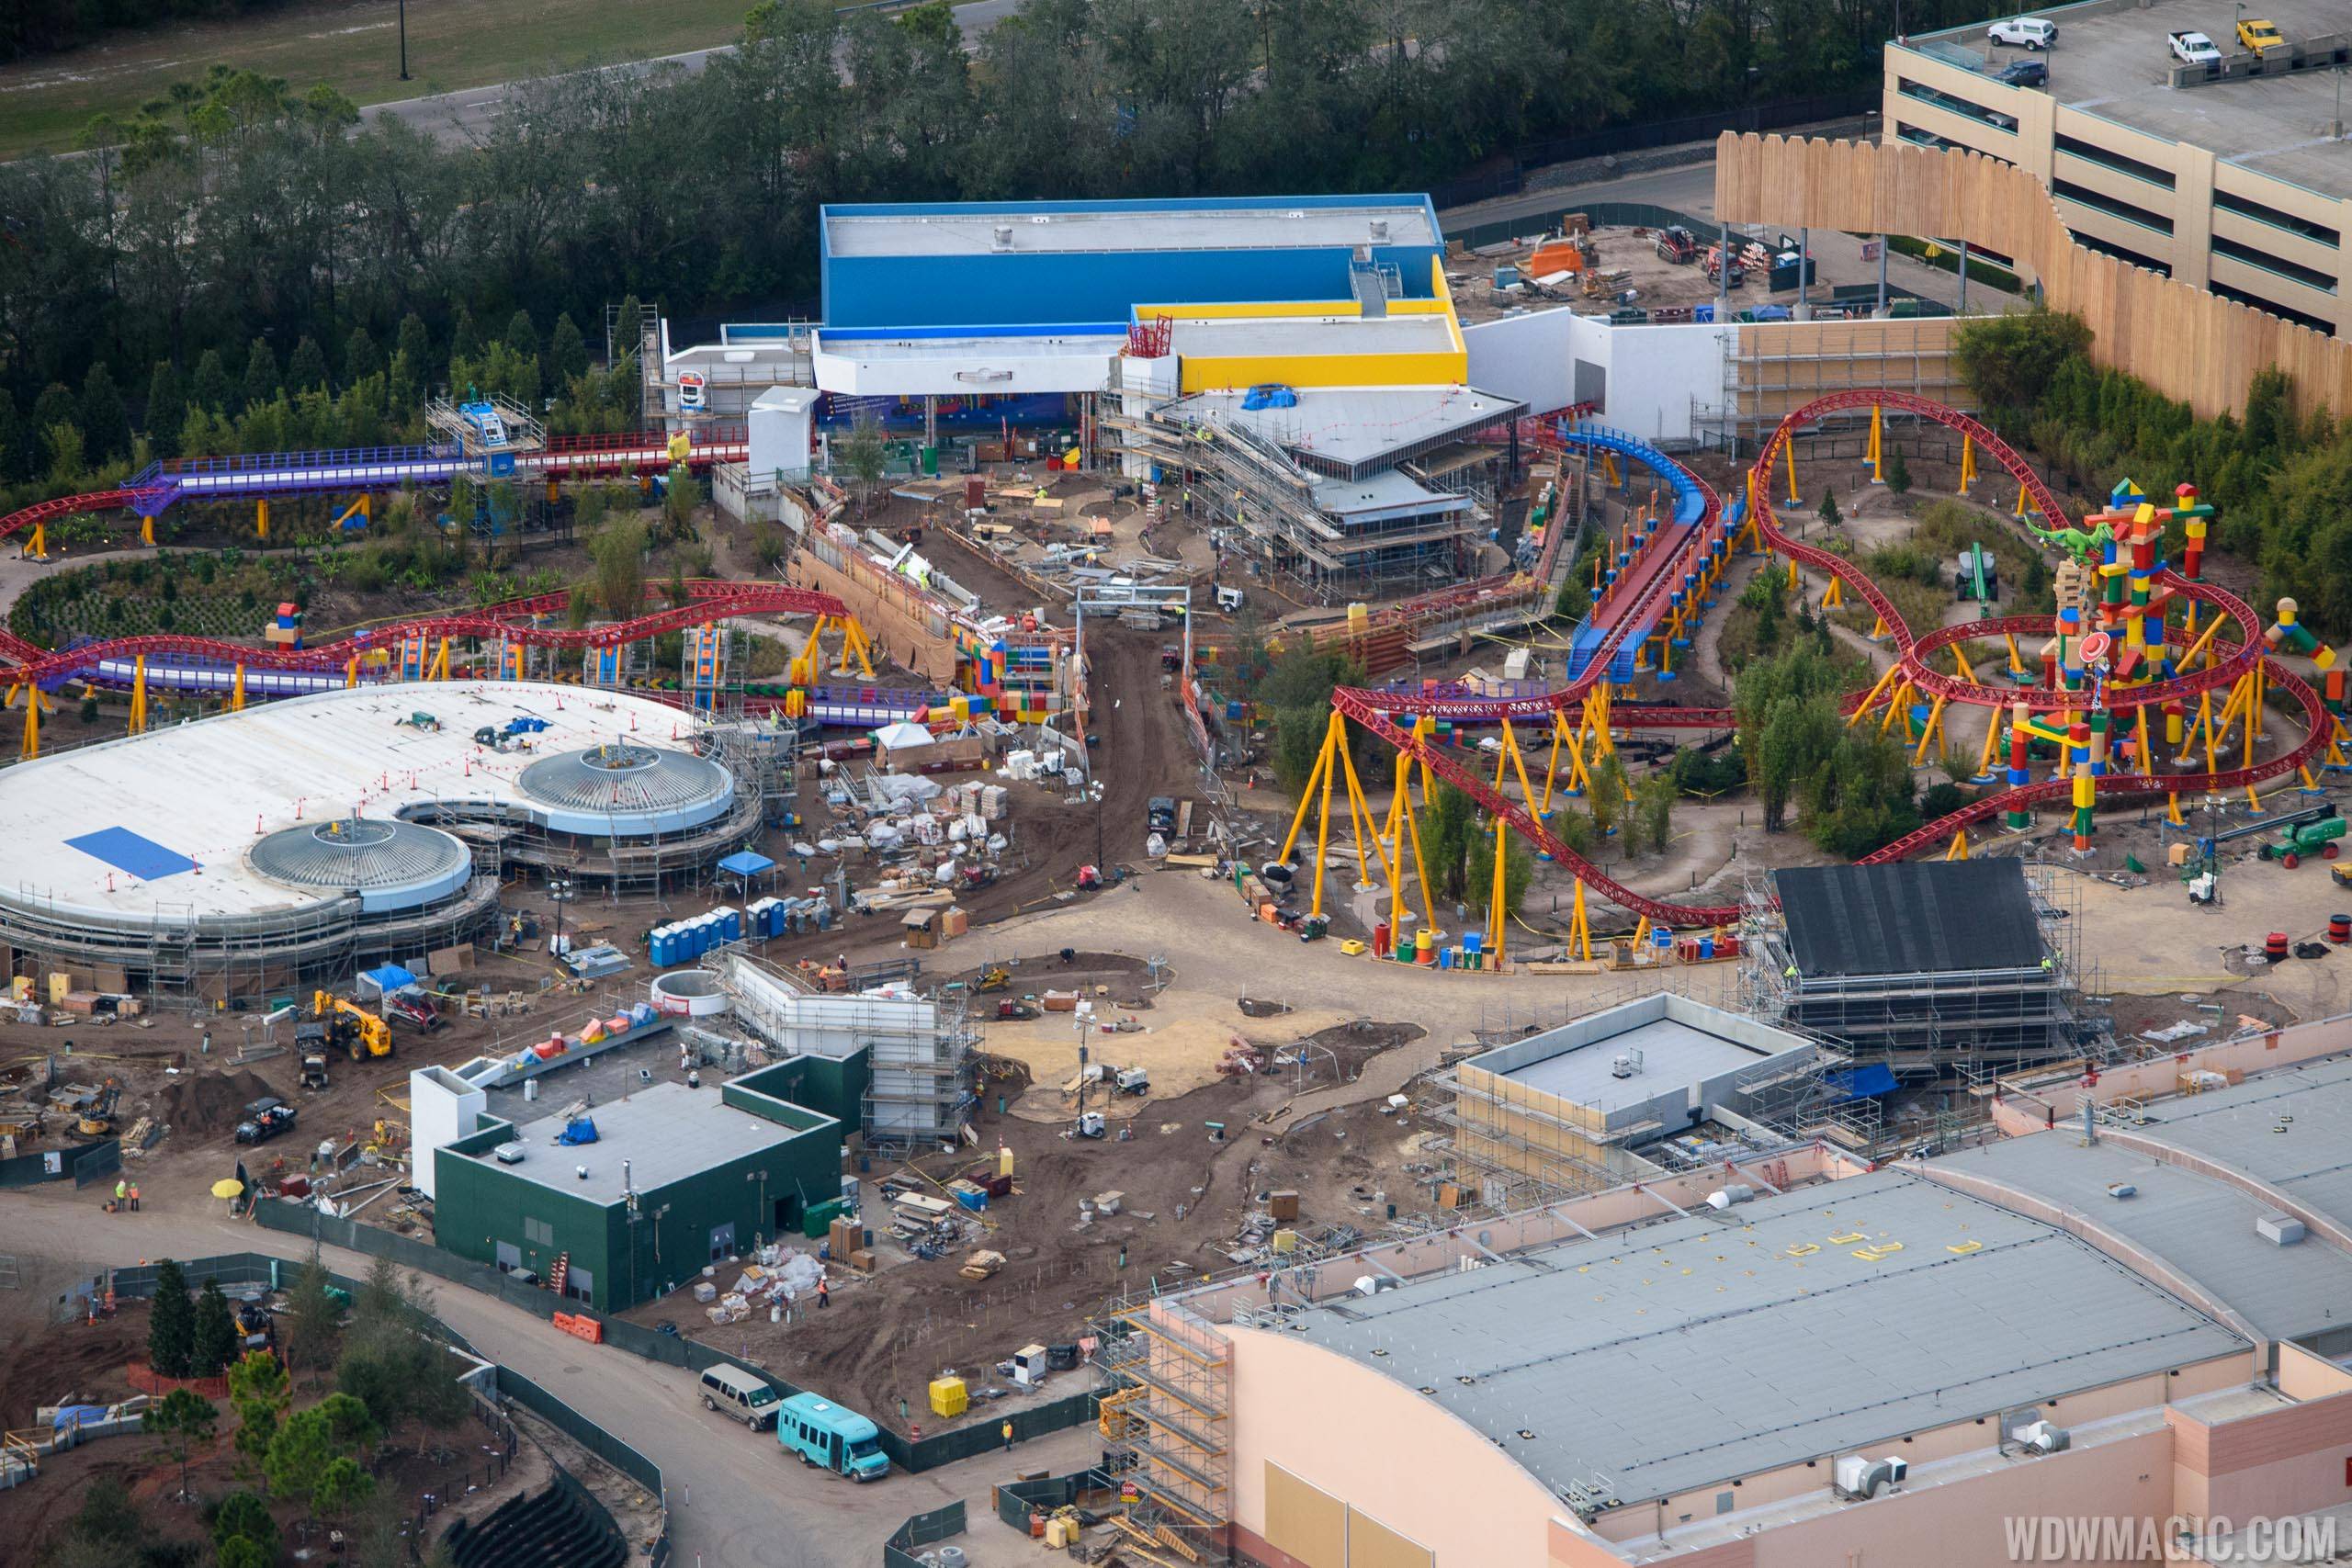 PHOTOS - Aerial views of Toy Story Land construction at Disney's Hollywood Studios